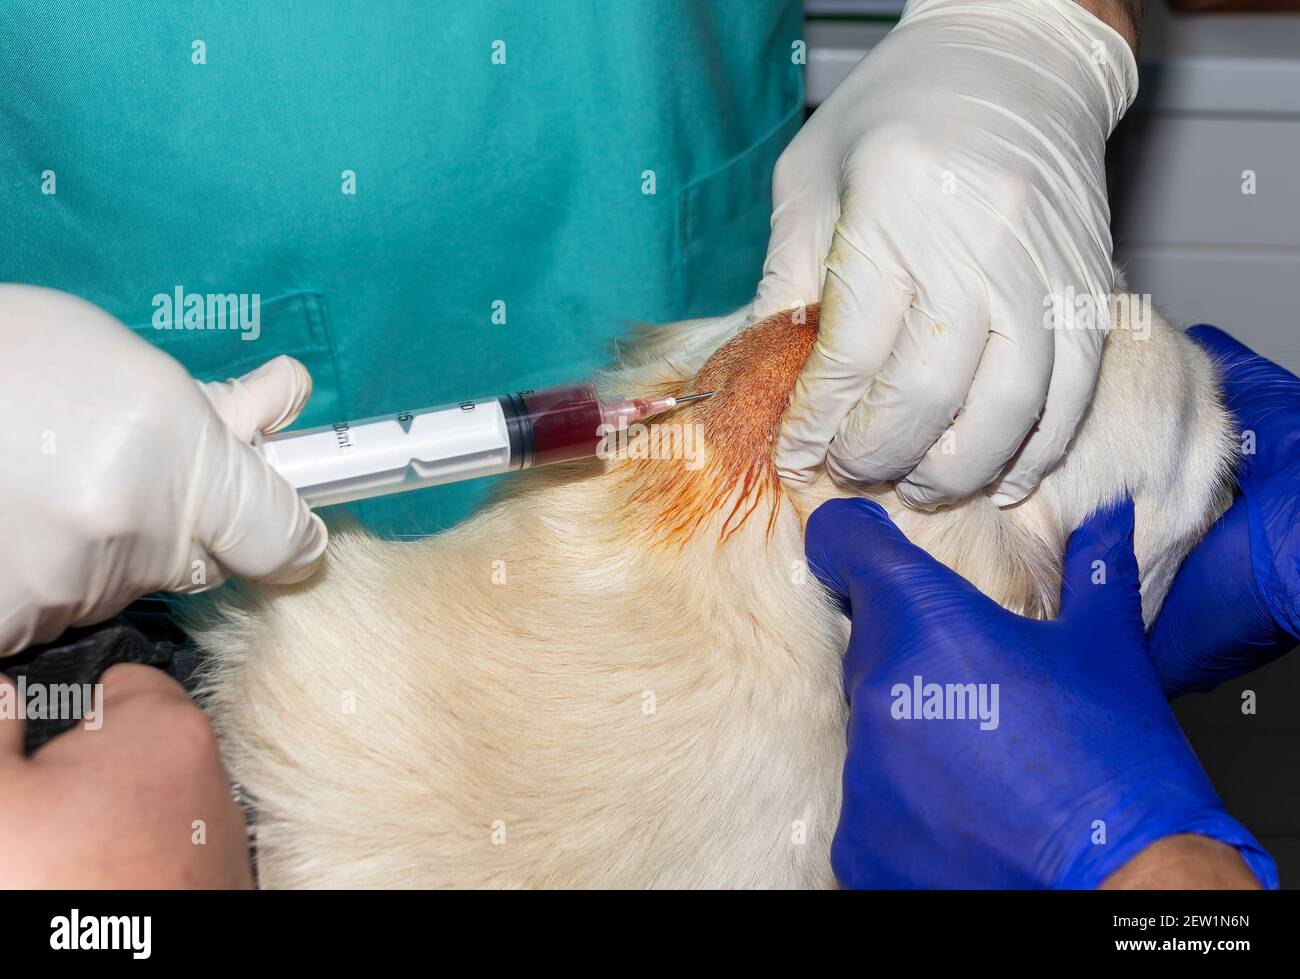 A Skilled Veterinarian drains an abcess on the head of a Golden Retriever dog Stock Photo